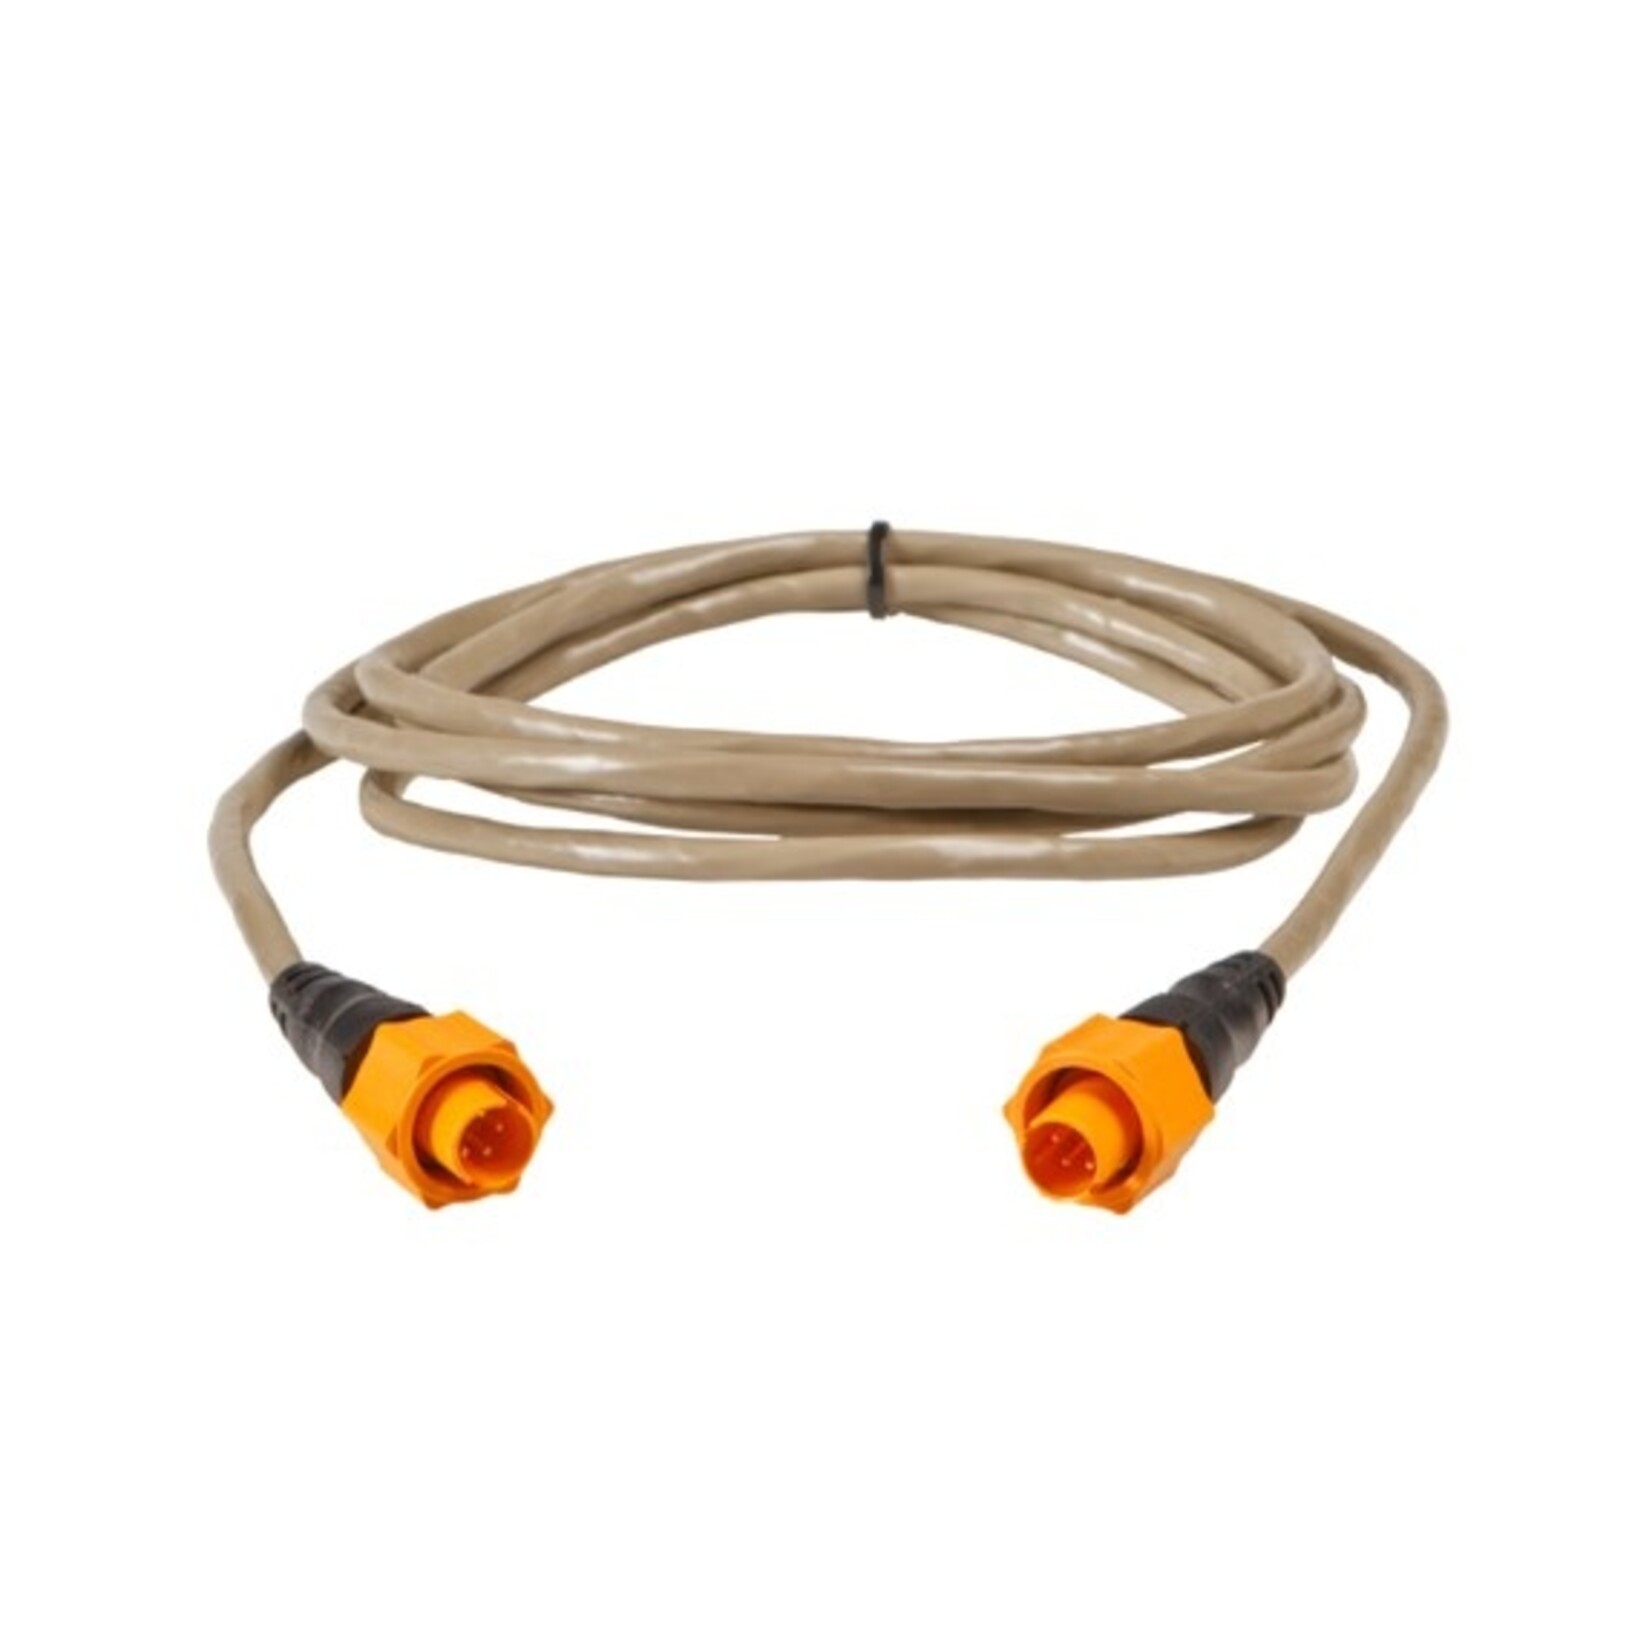 Ethernet Cable 1.8m (6ft)